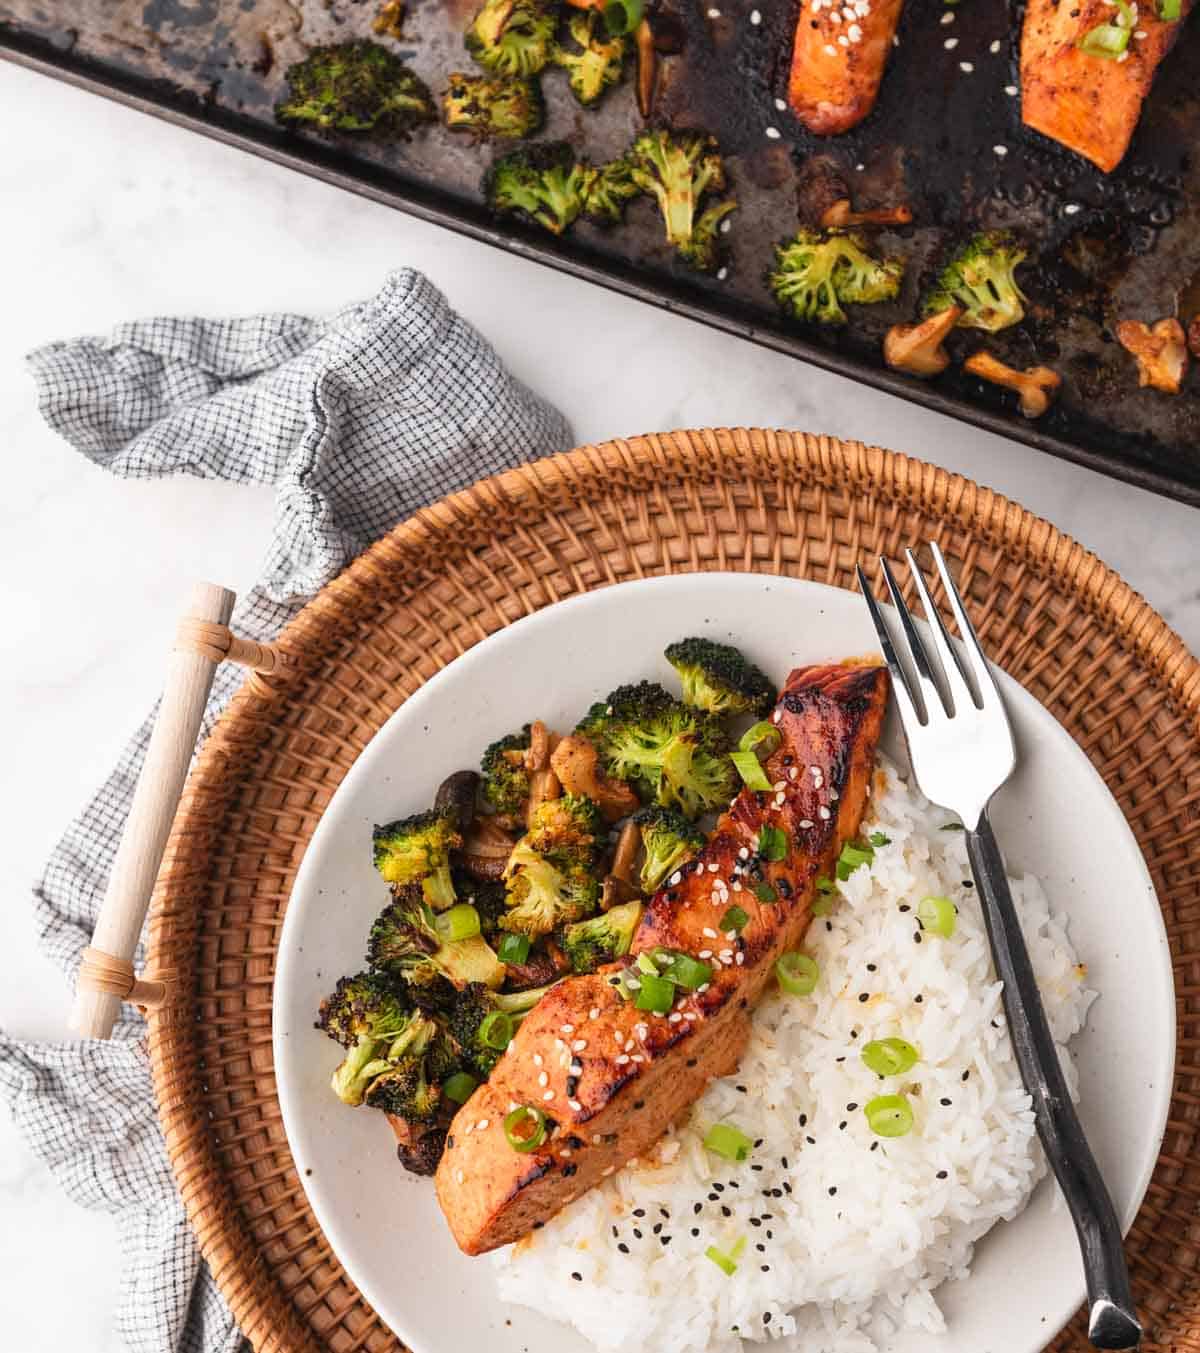 Asian style salmon topped with green onion and sesame seeds on a plate next to rice and veggies